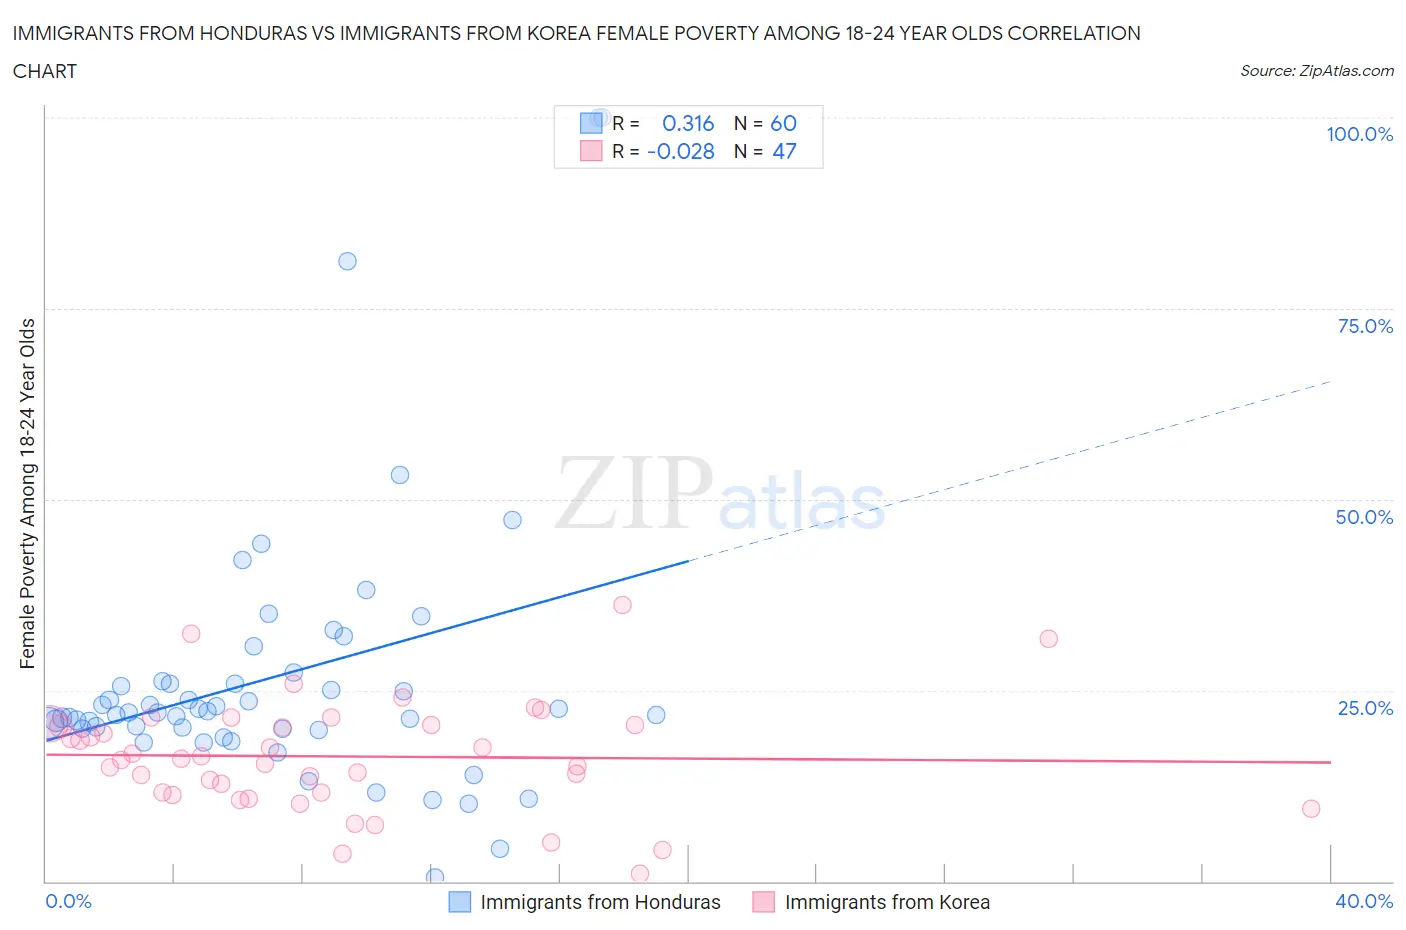 Immigrants from Honduras vs Immigrants from Korea Female Poverty Among 18-24 Year Olds